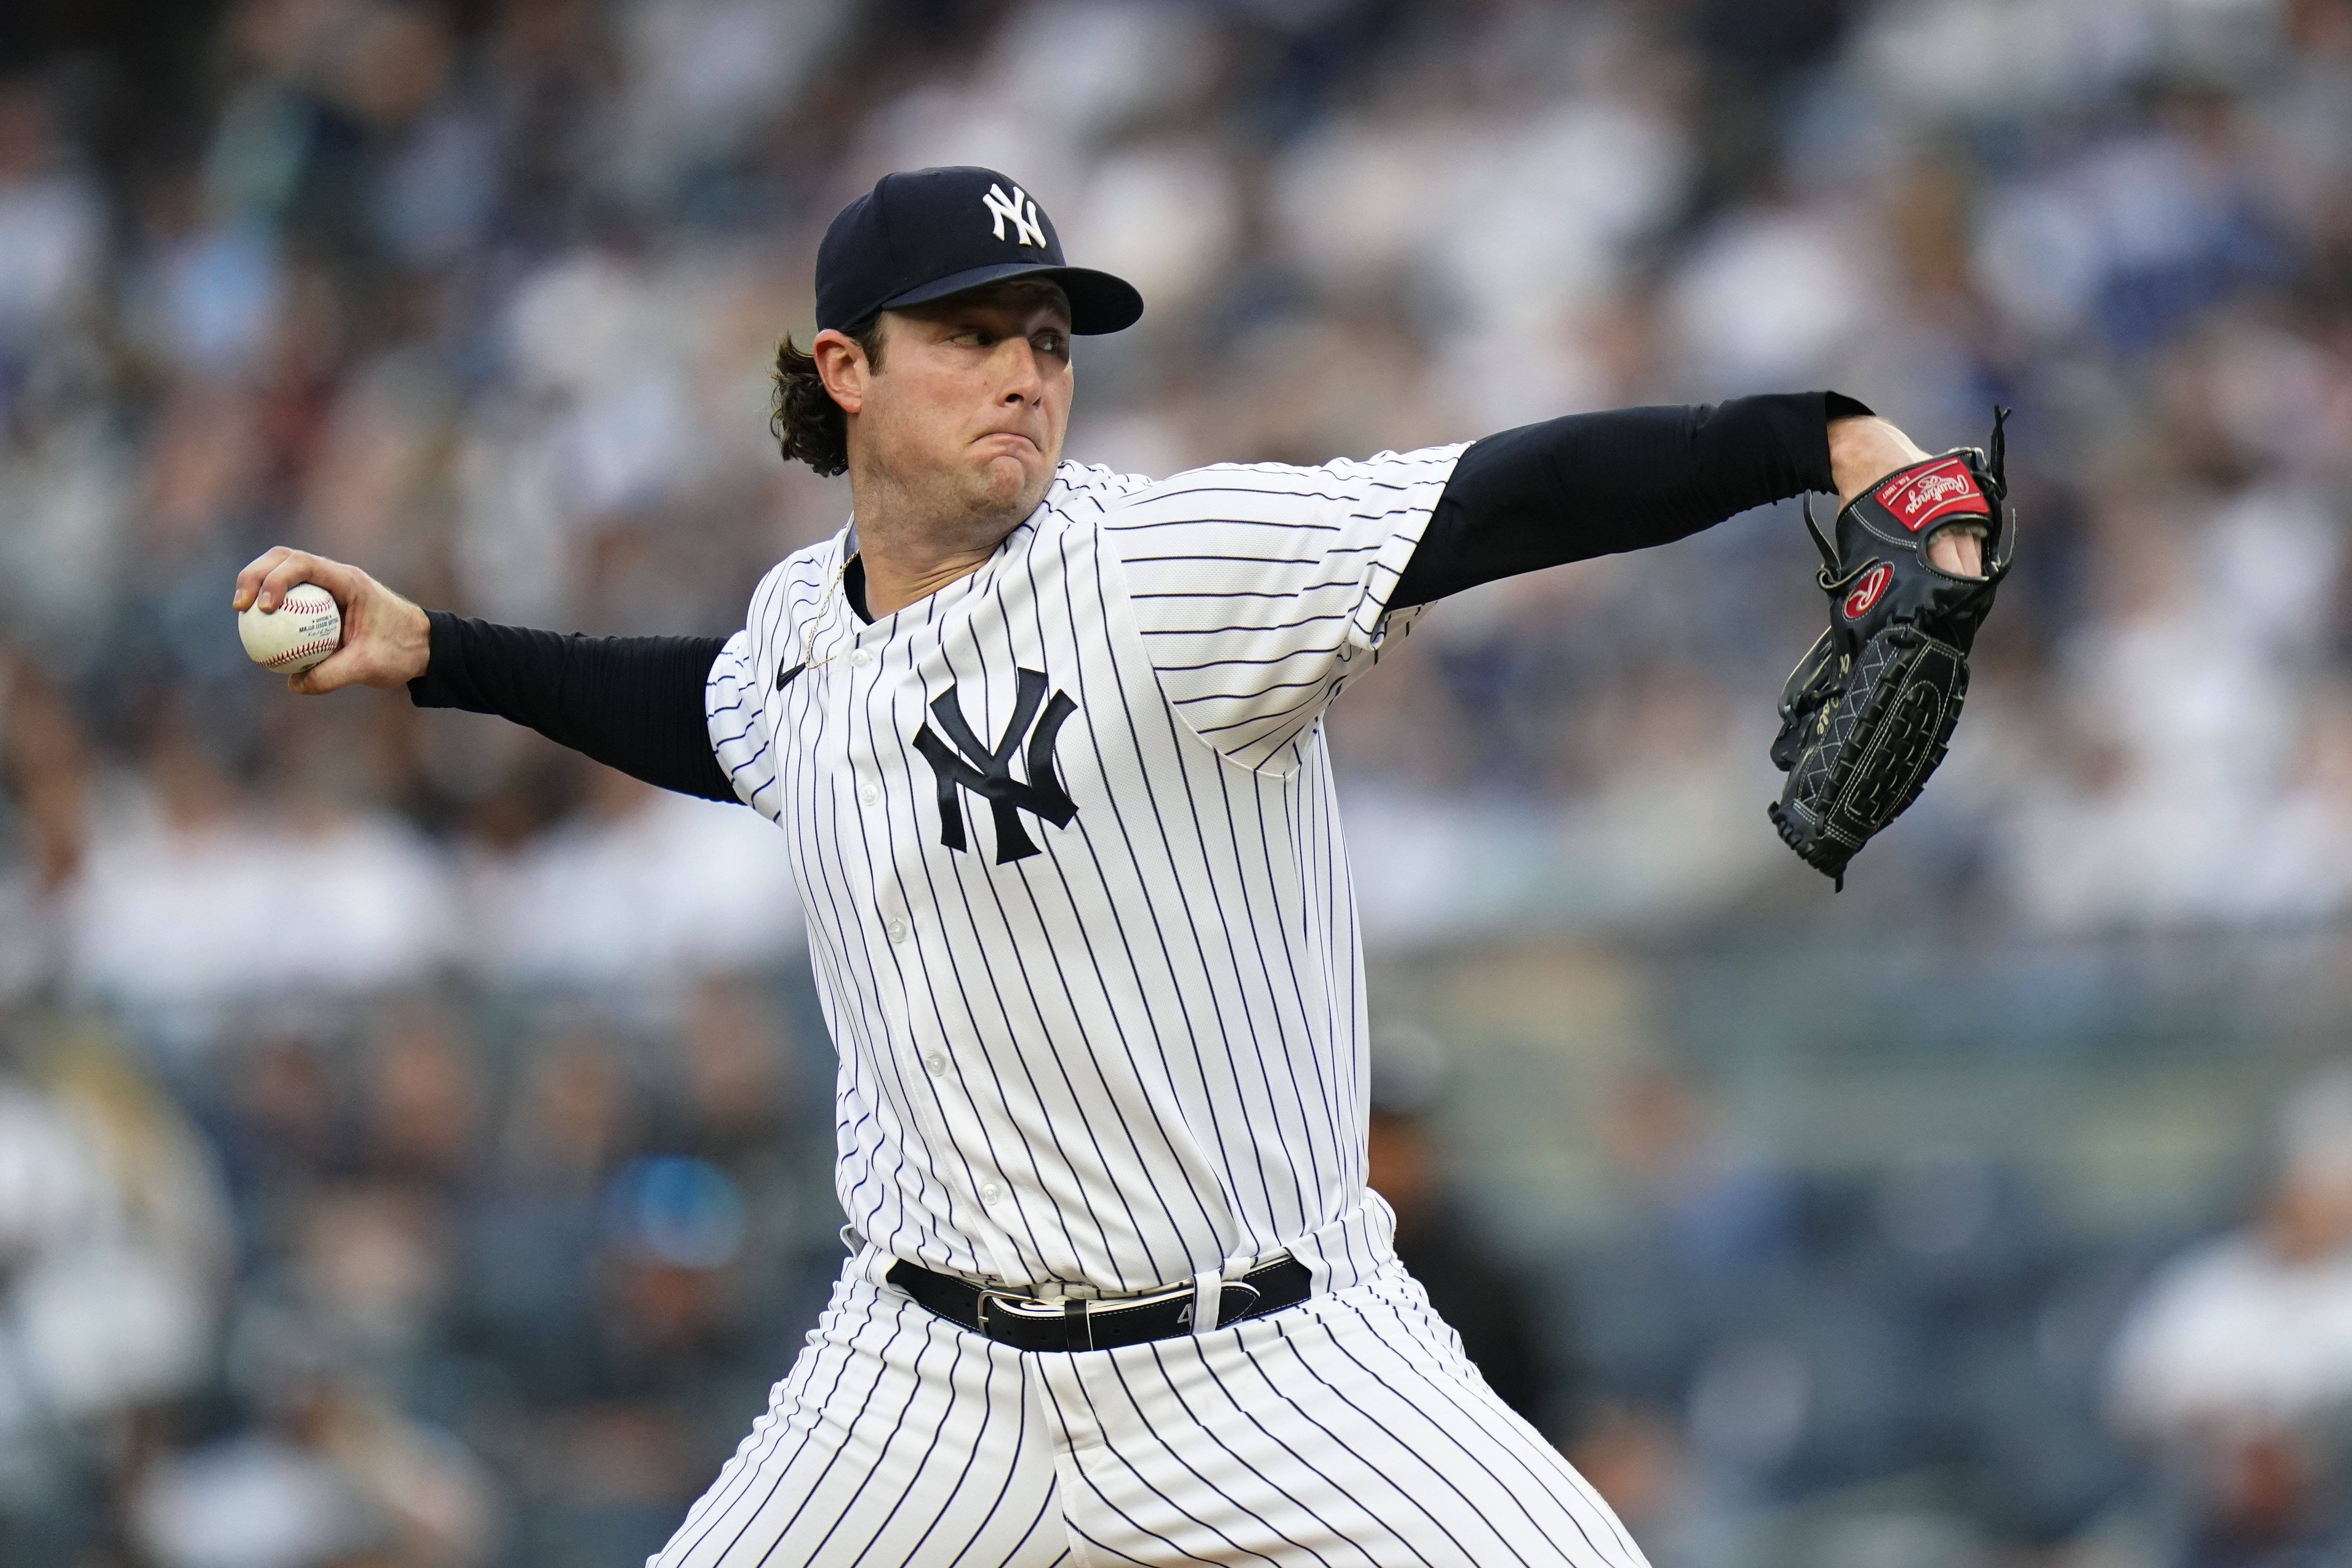 Yankees whip Twins, Gerrit Cole dominates